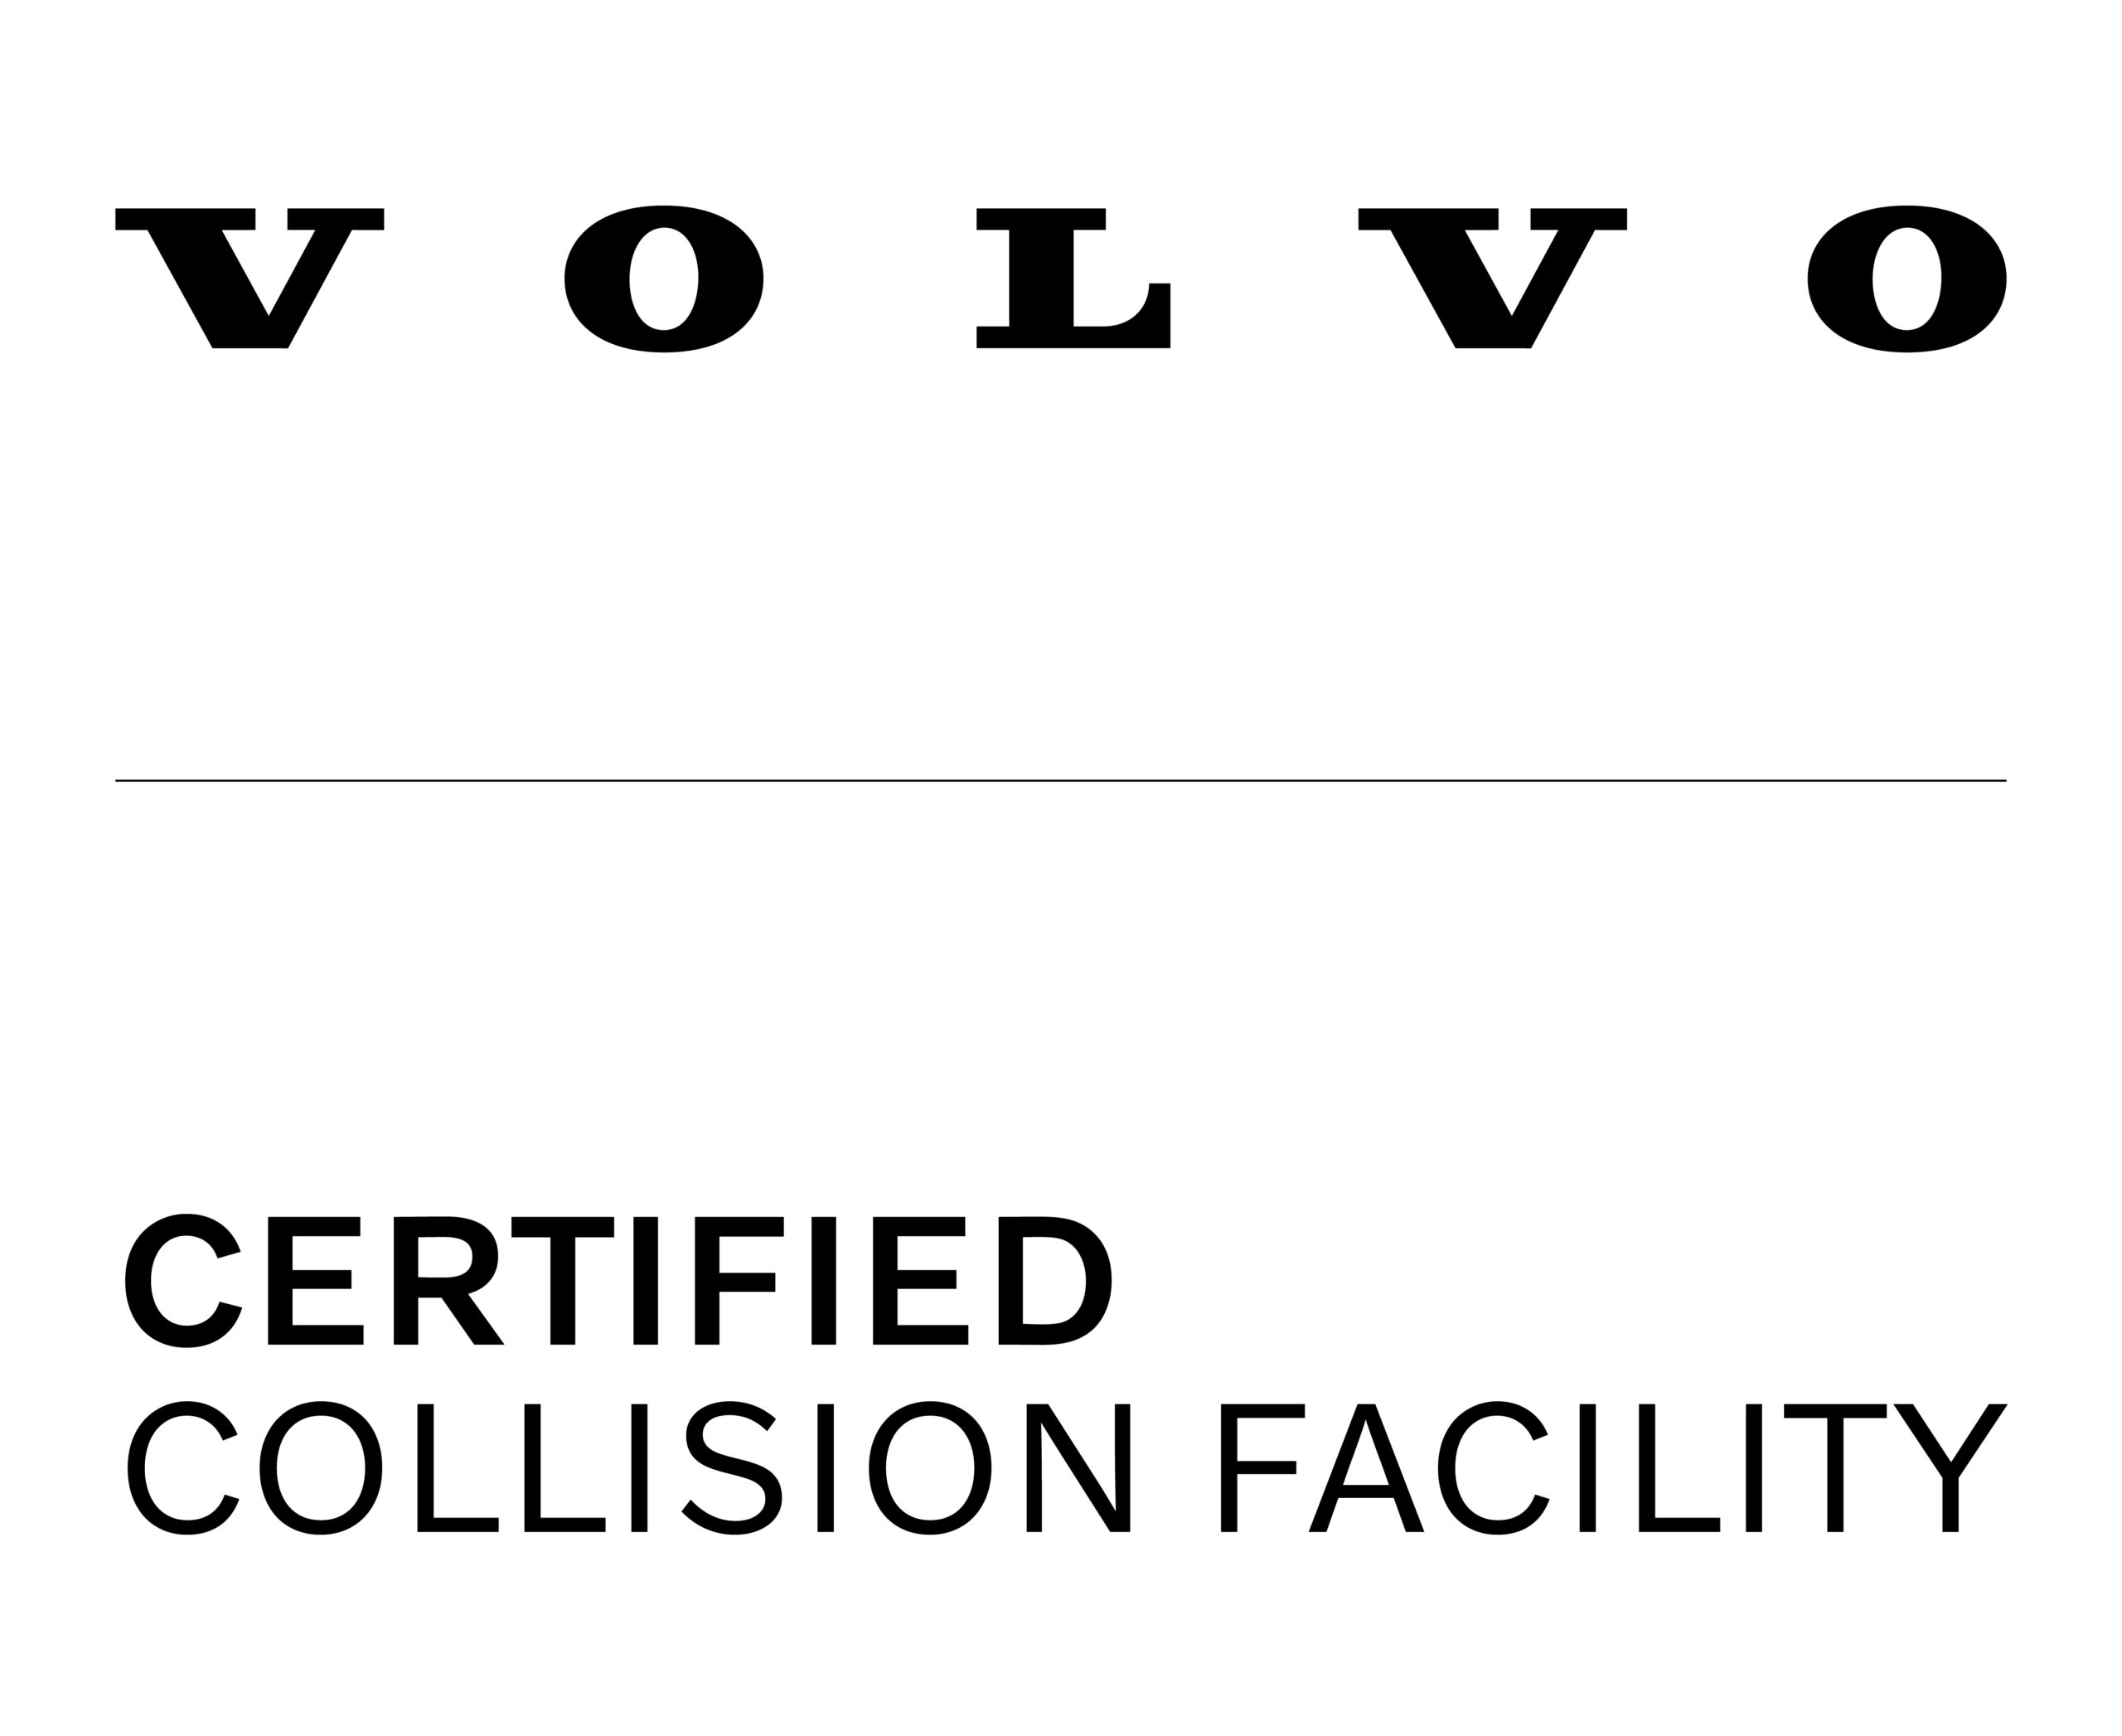 Volvo Certified Collision Facility Vert